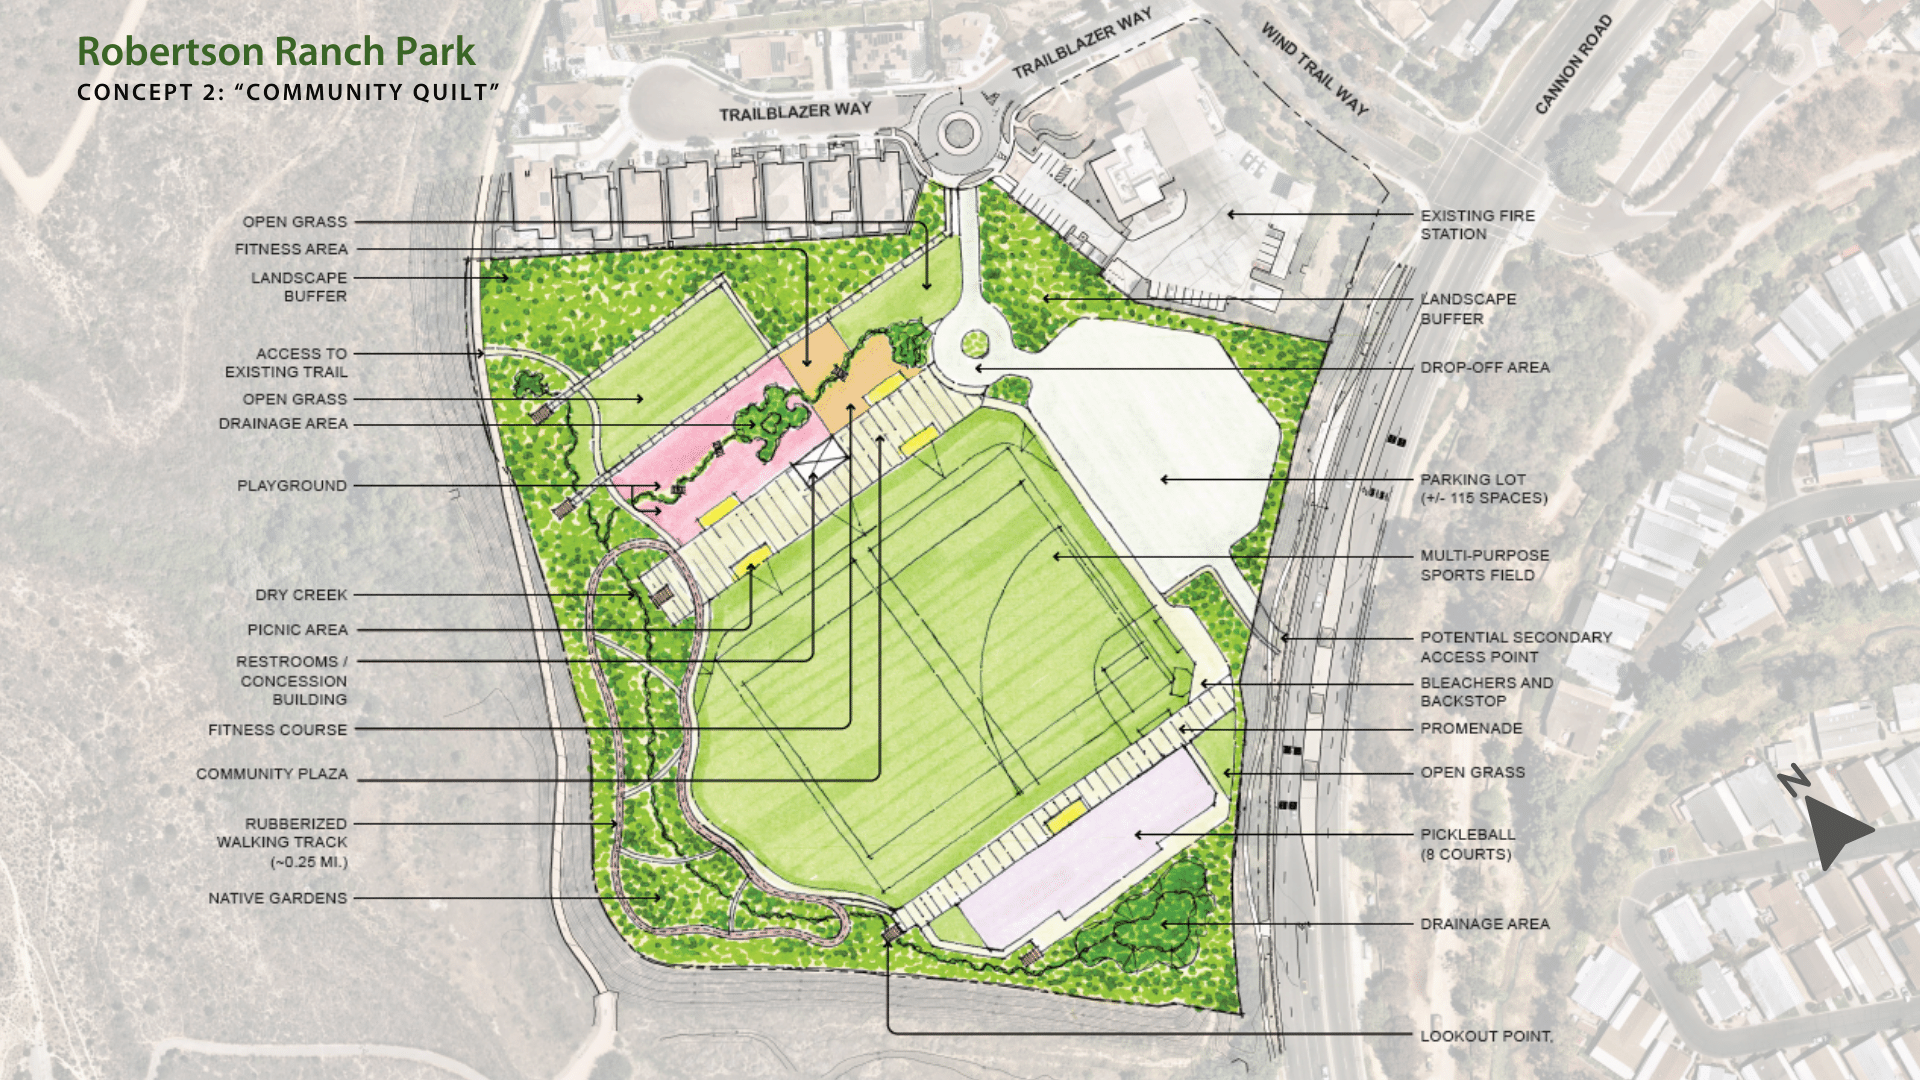 A detailed drawing shows all of the features and amenities of the Community Quilt park design concept.